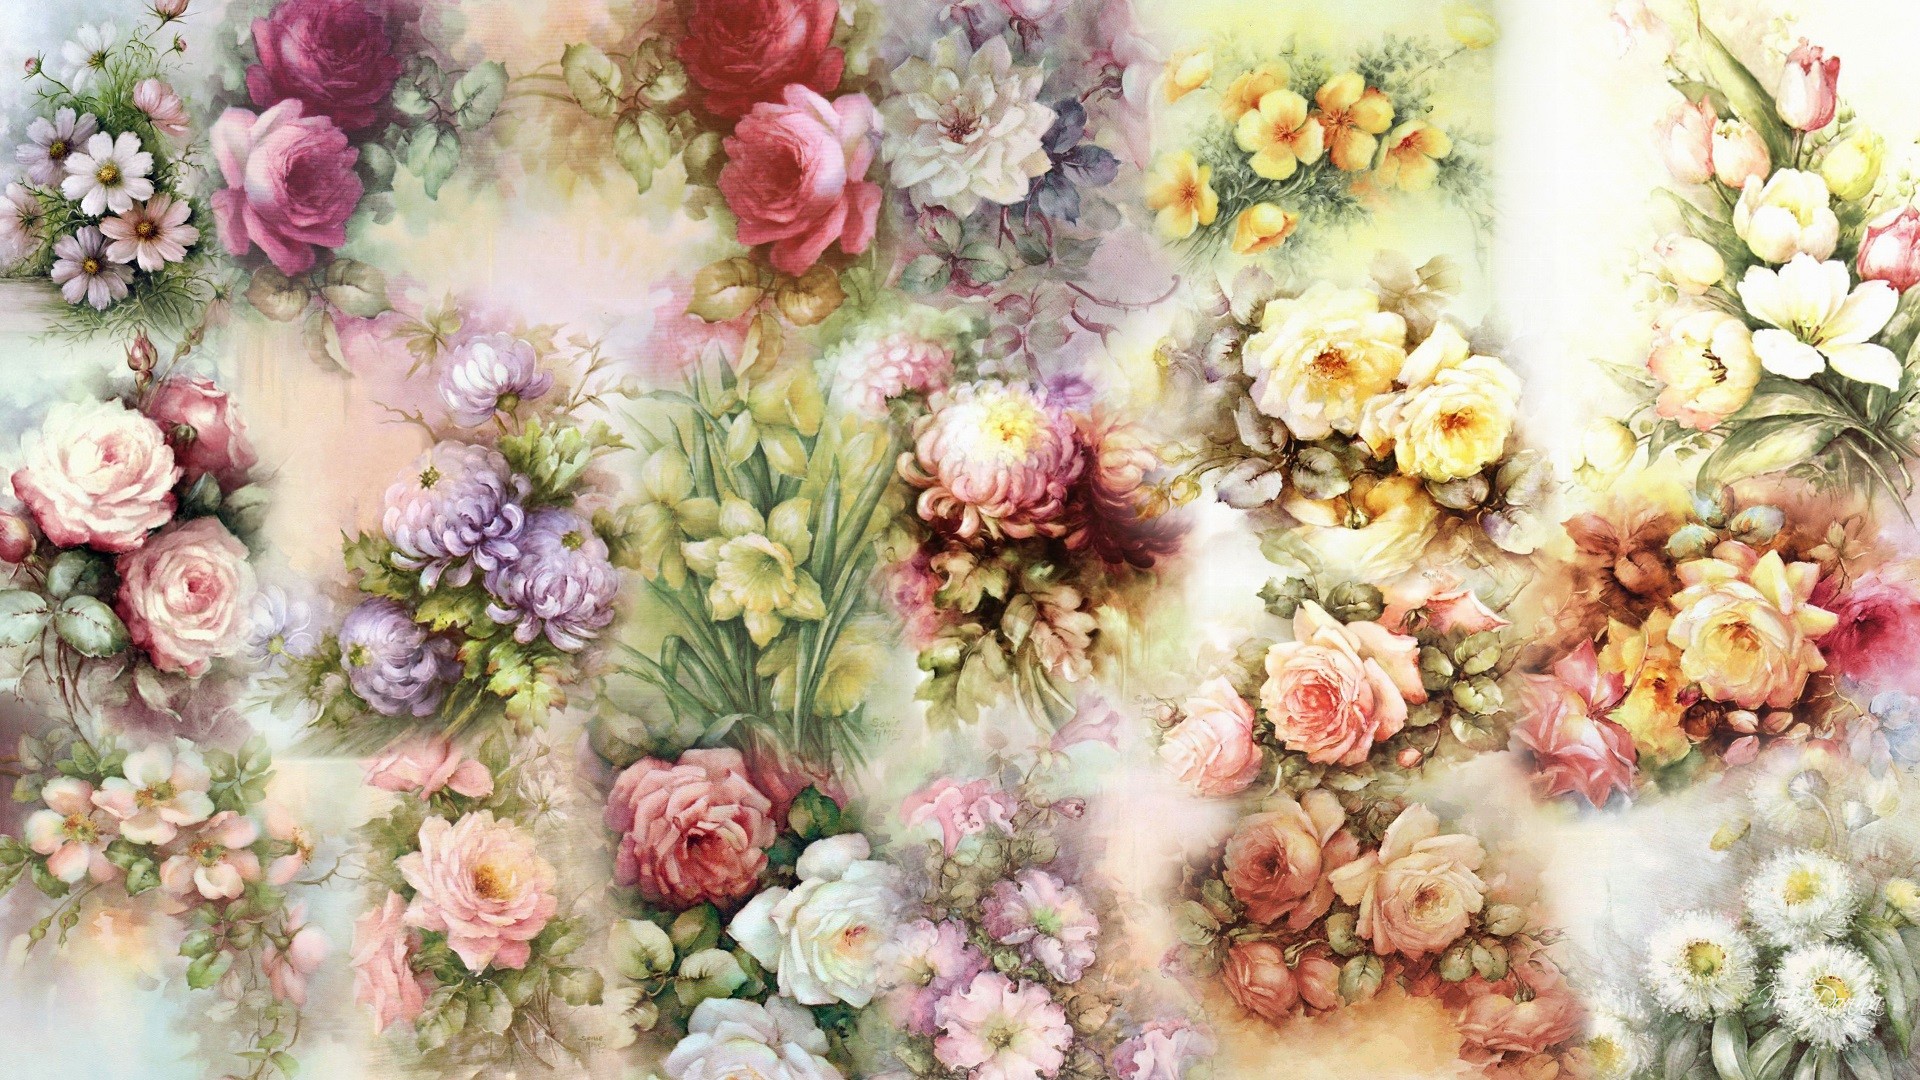 Flower Collage by MaDonna